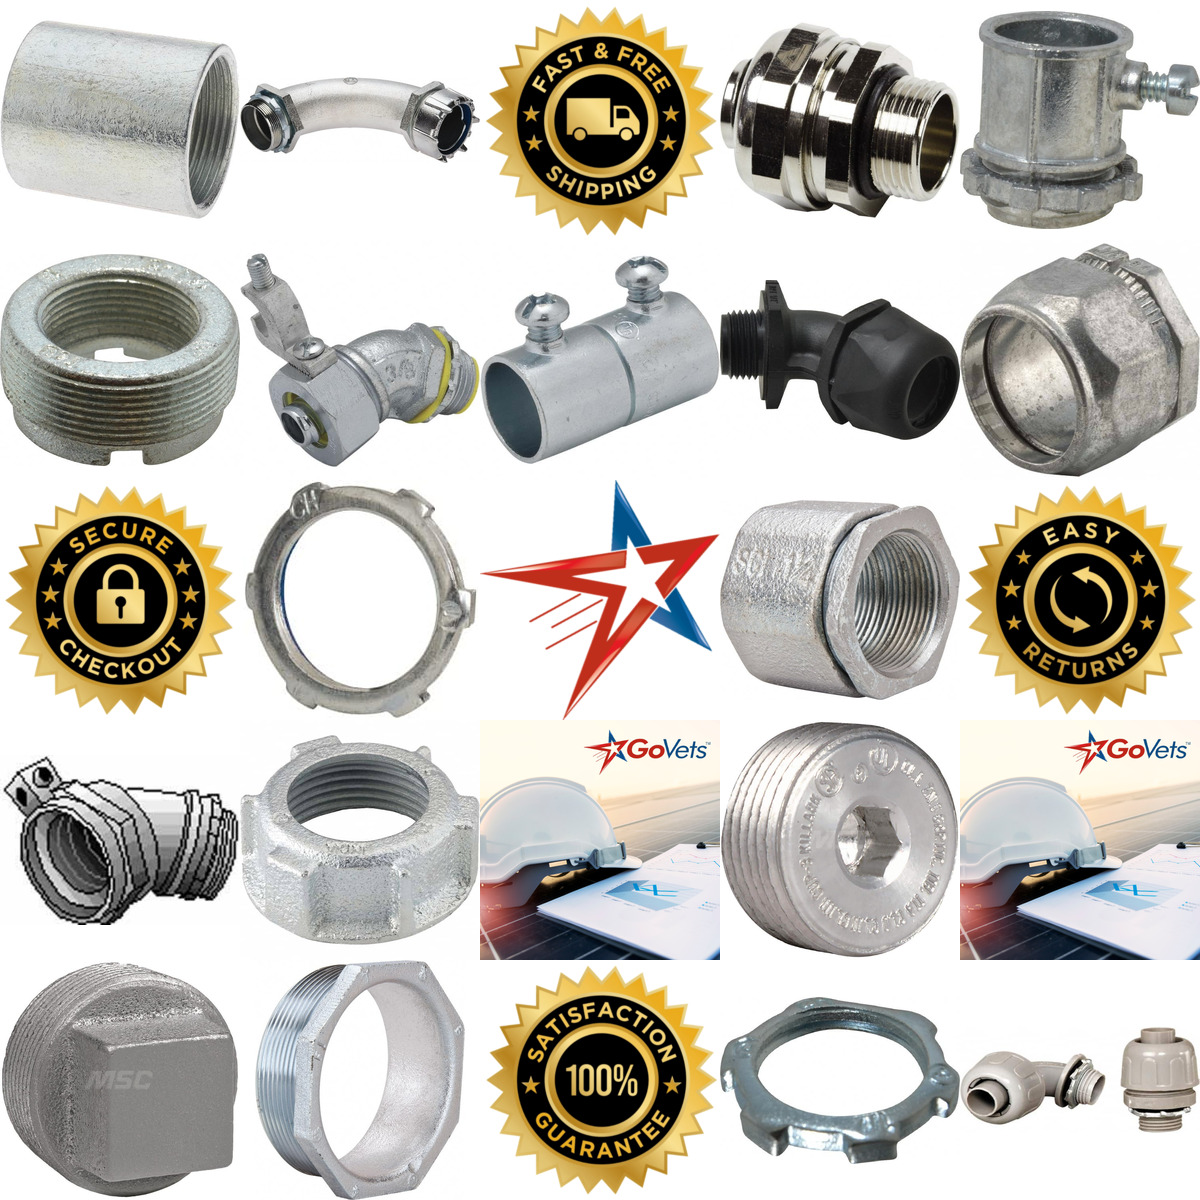 A selection of Conduit Fittings products on GoVets